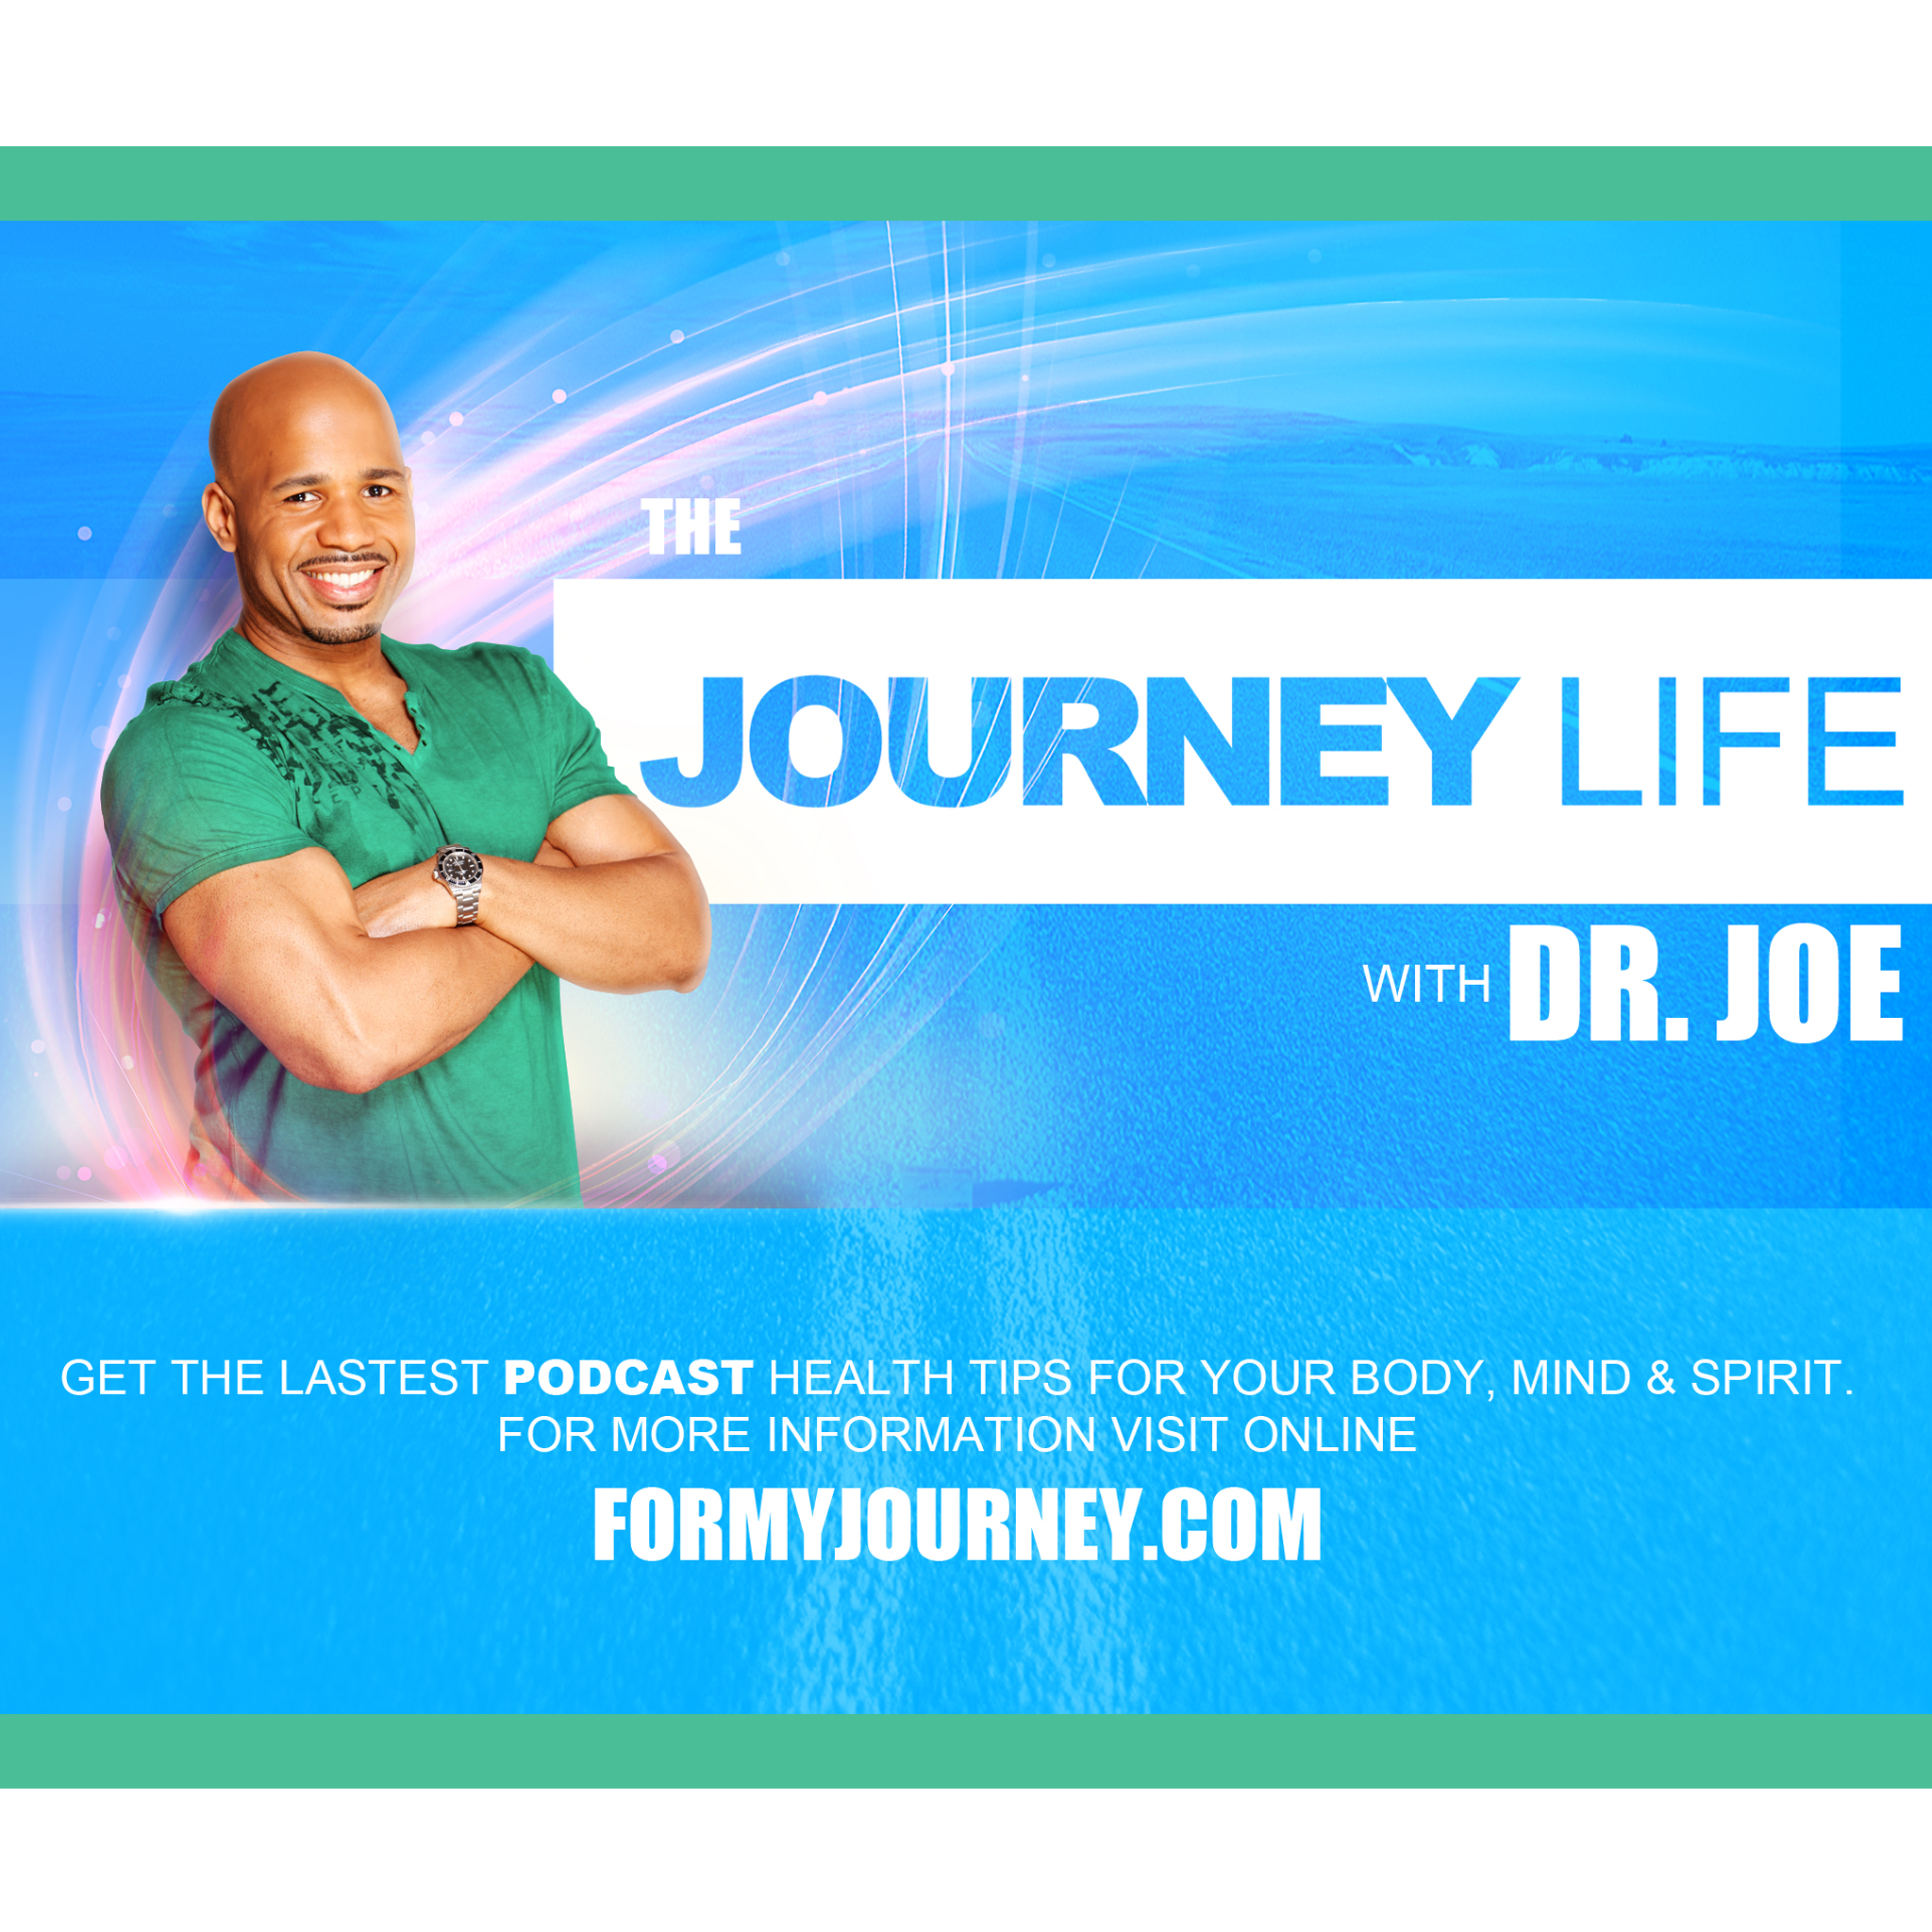 The Journey Life with Dr. Joe